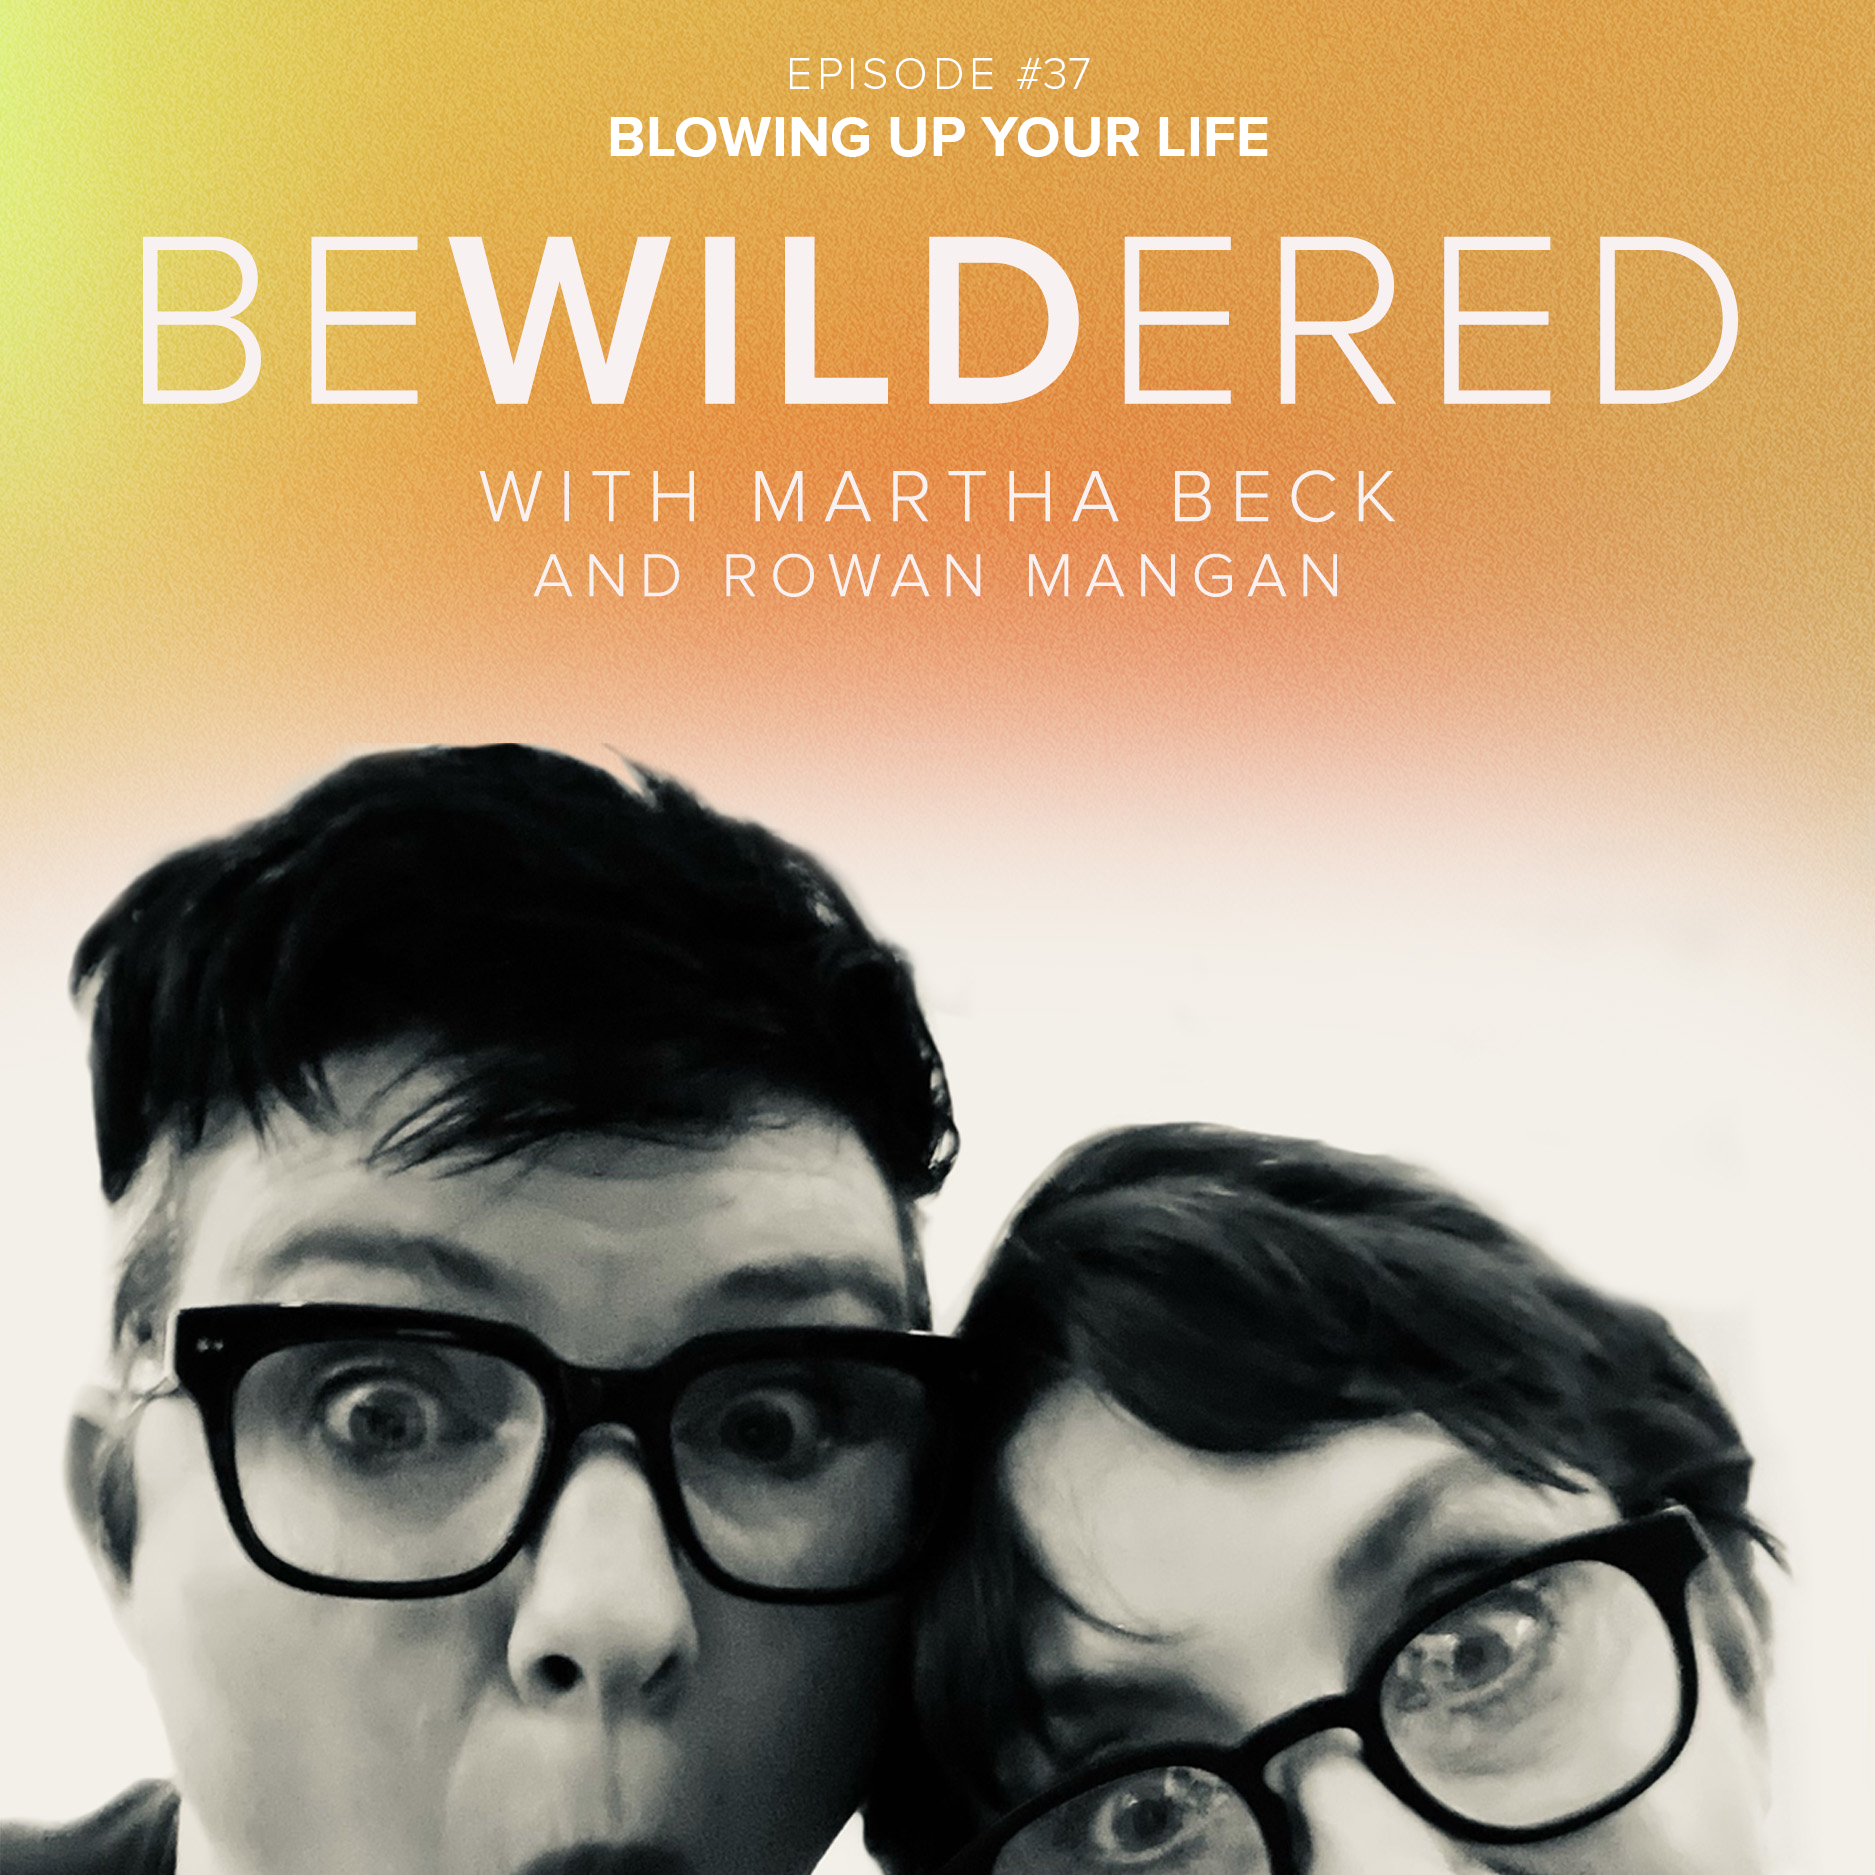 Image for Episode #37 Blowing Up Your Life for the Bewildered Podcast with Martha Beck and Rowan Mangan